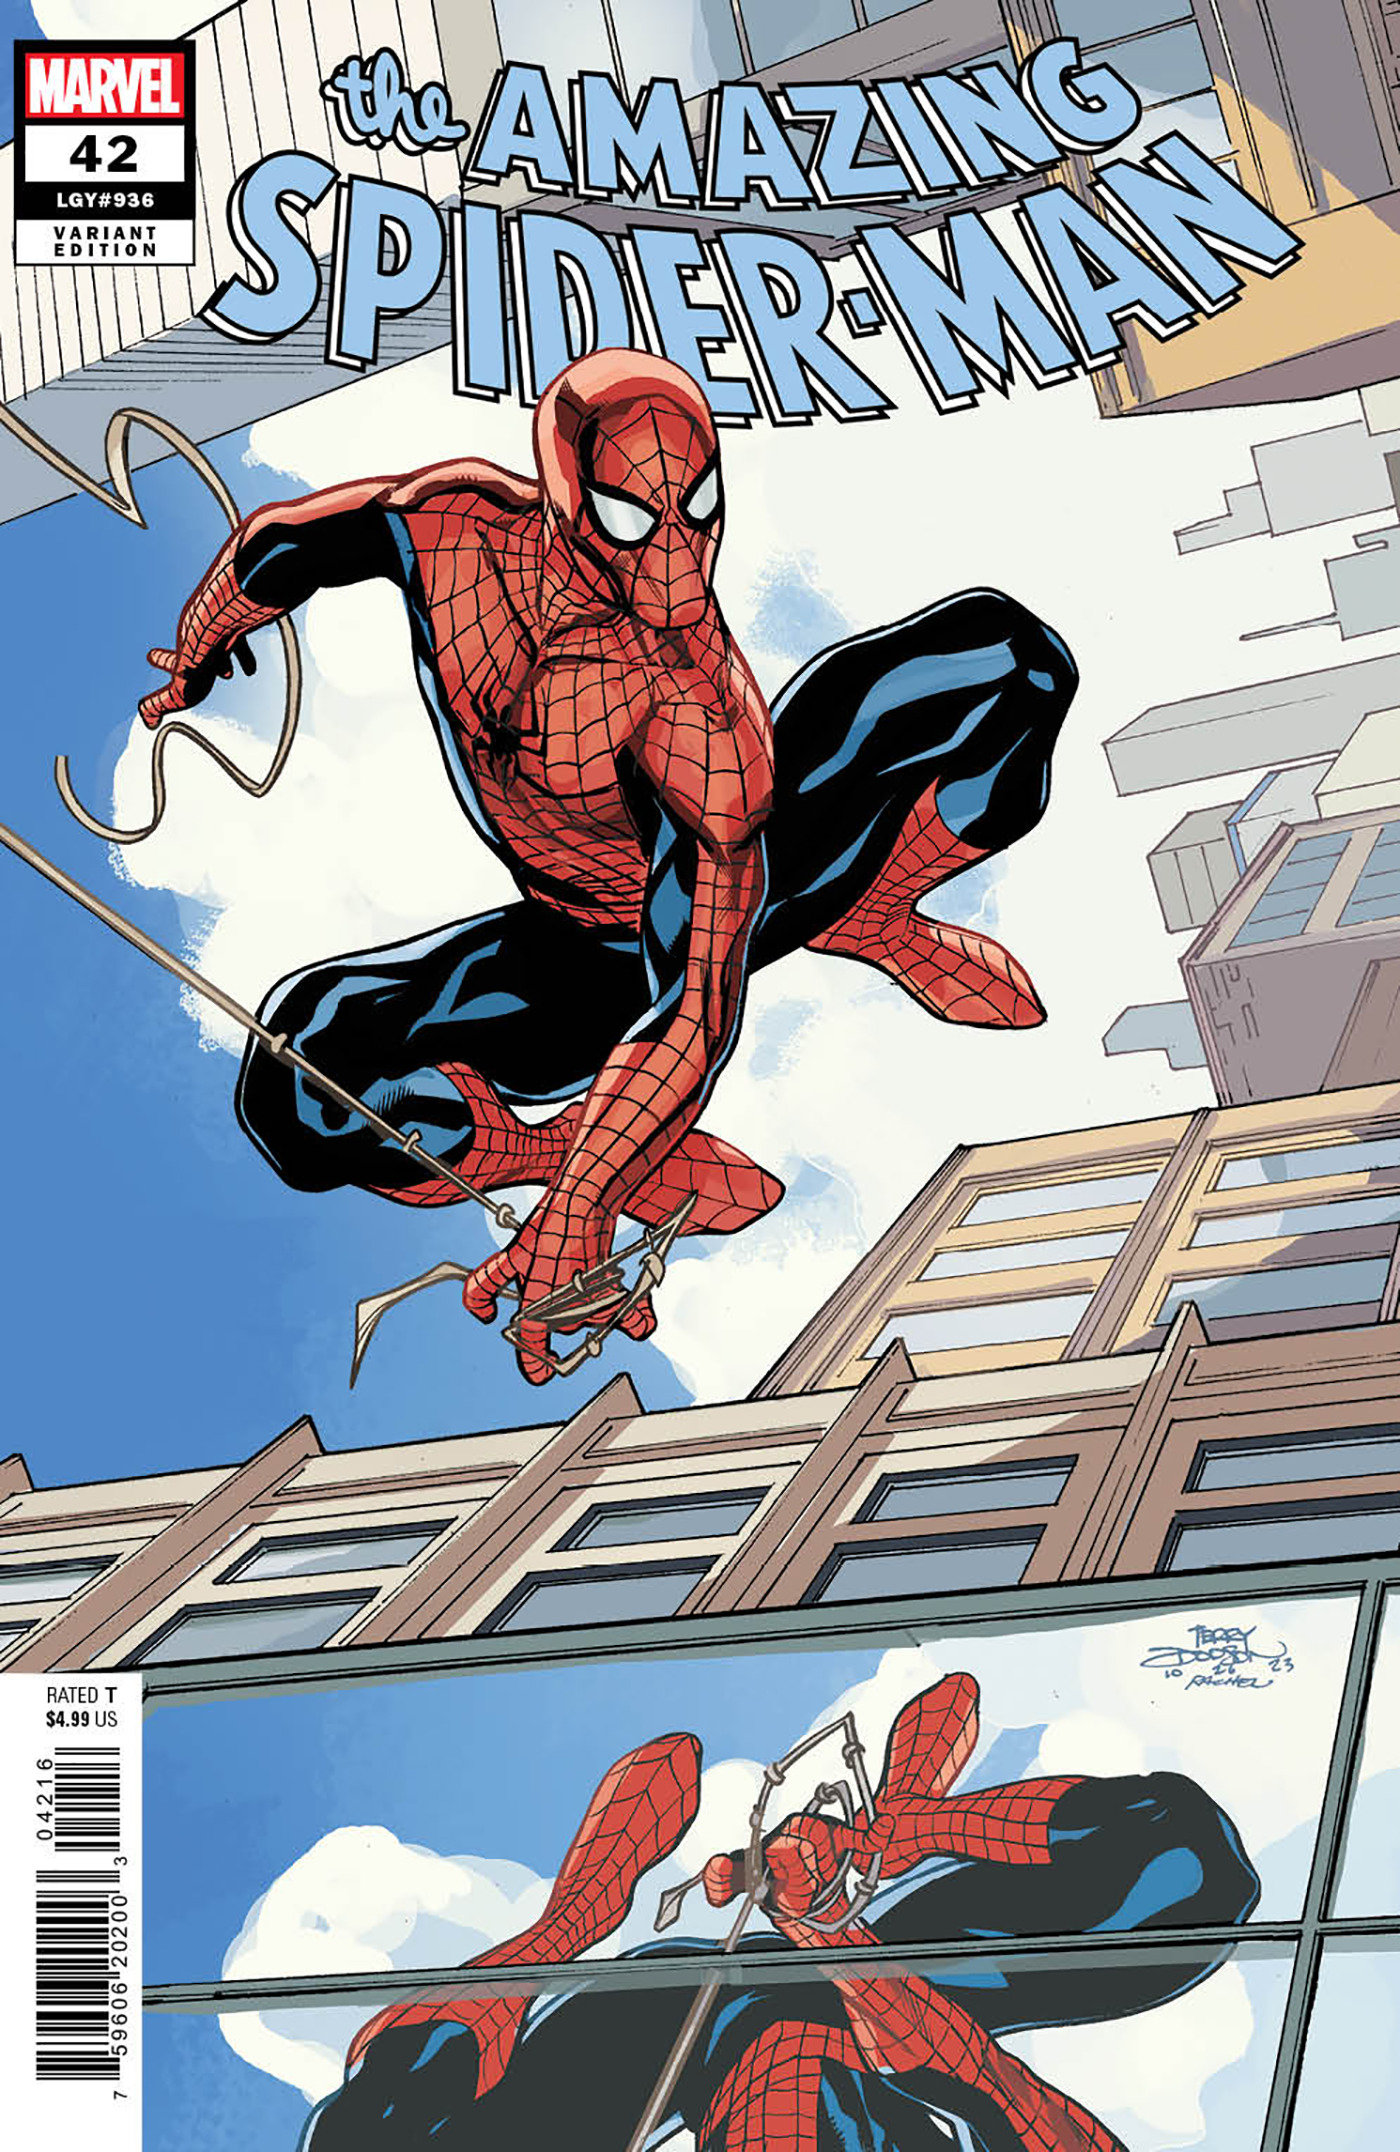 Amazing Spider-Man #42 Terry Dodson Variant (Gang War) 1 for 25 Incentive